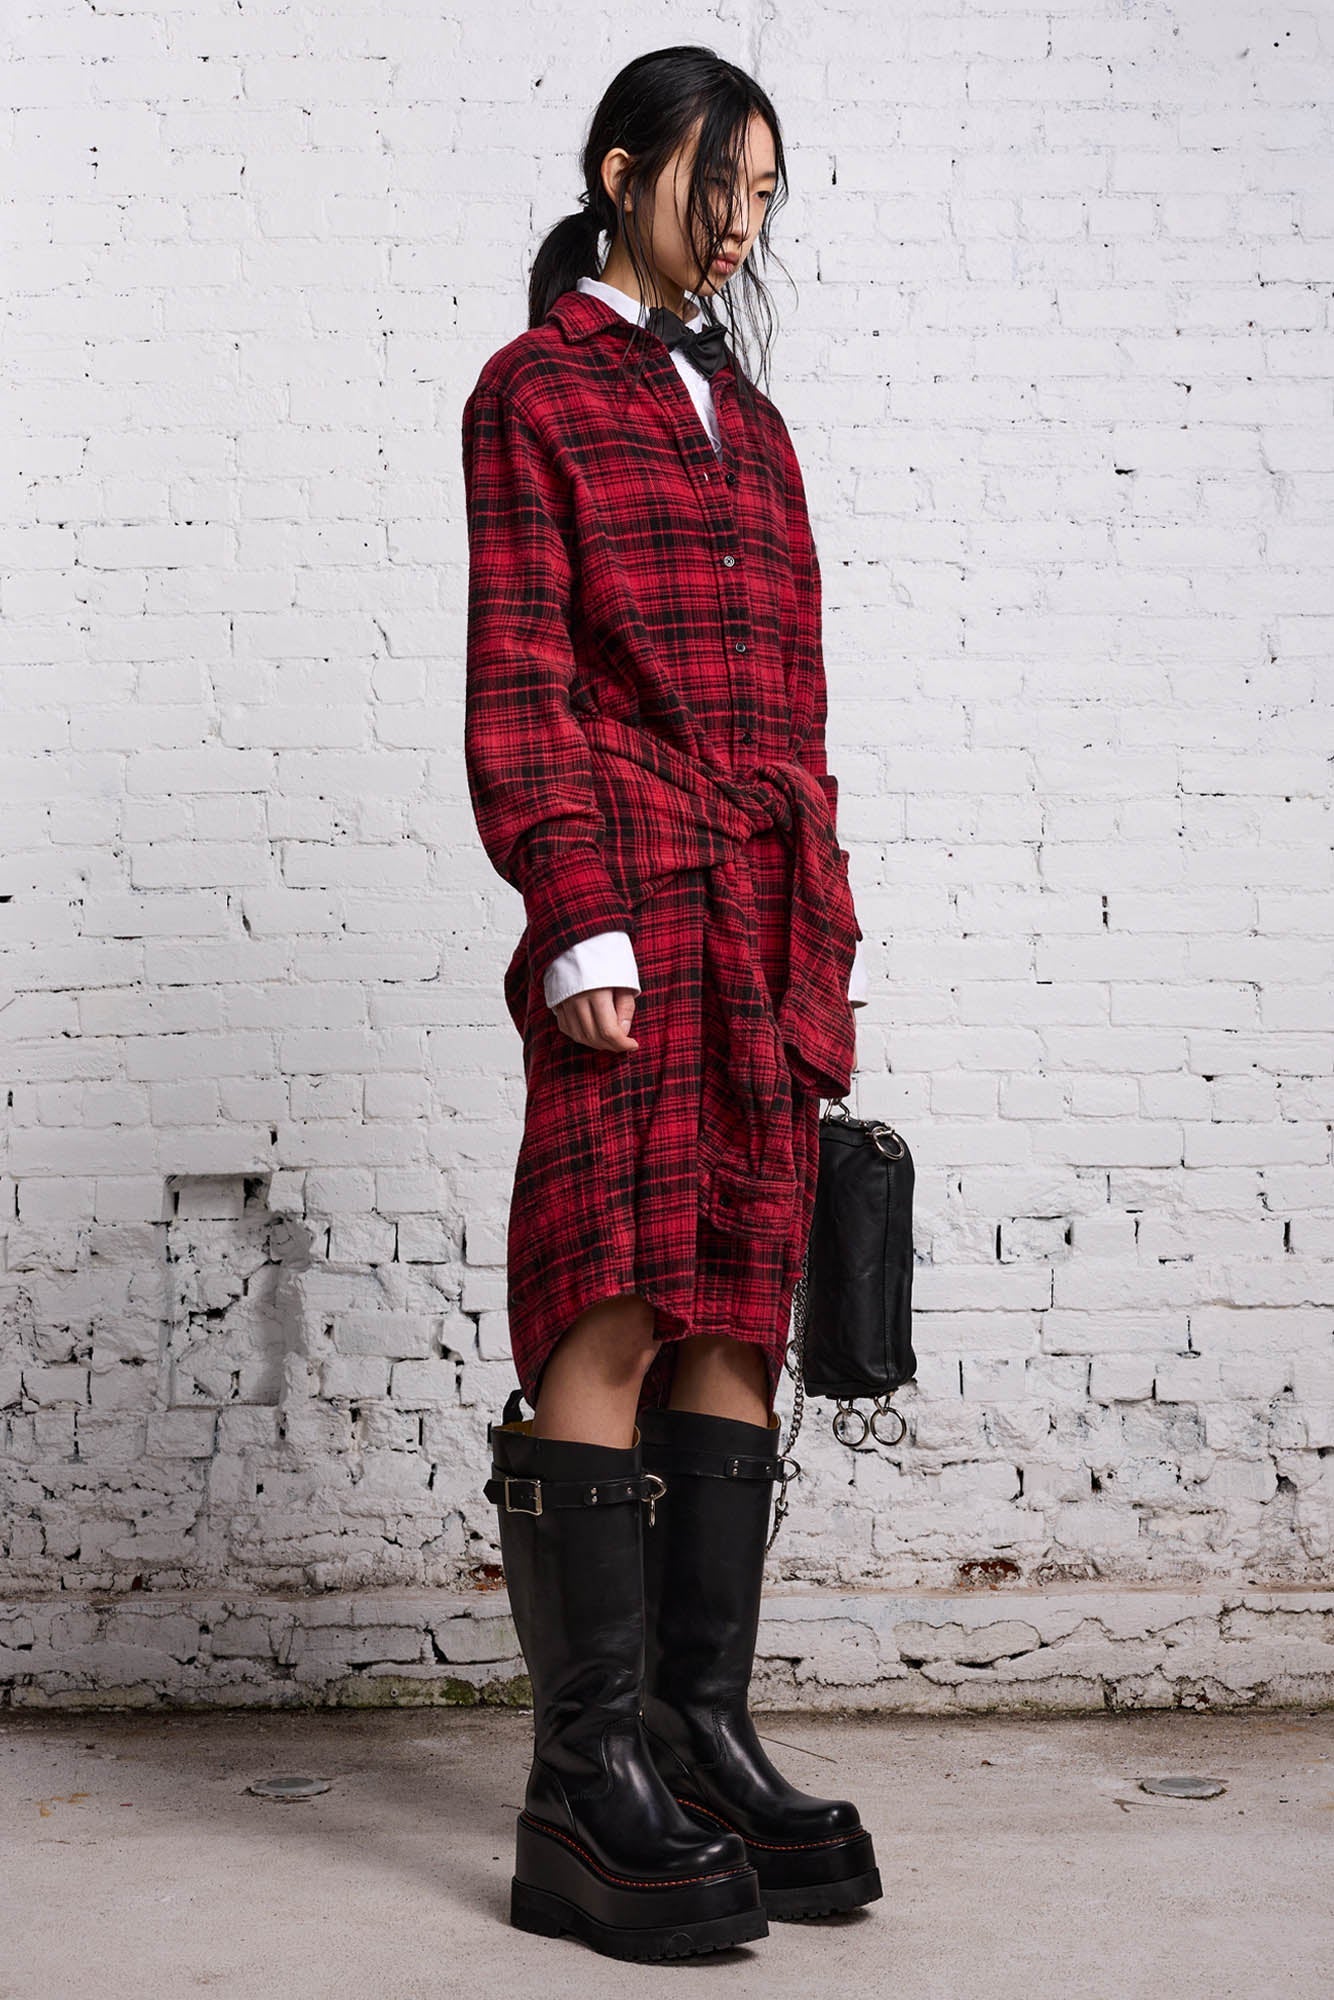 TIE SHIRTDRESS - RED AND BLACK